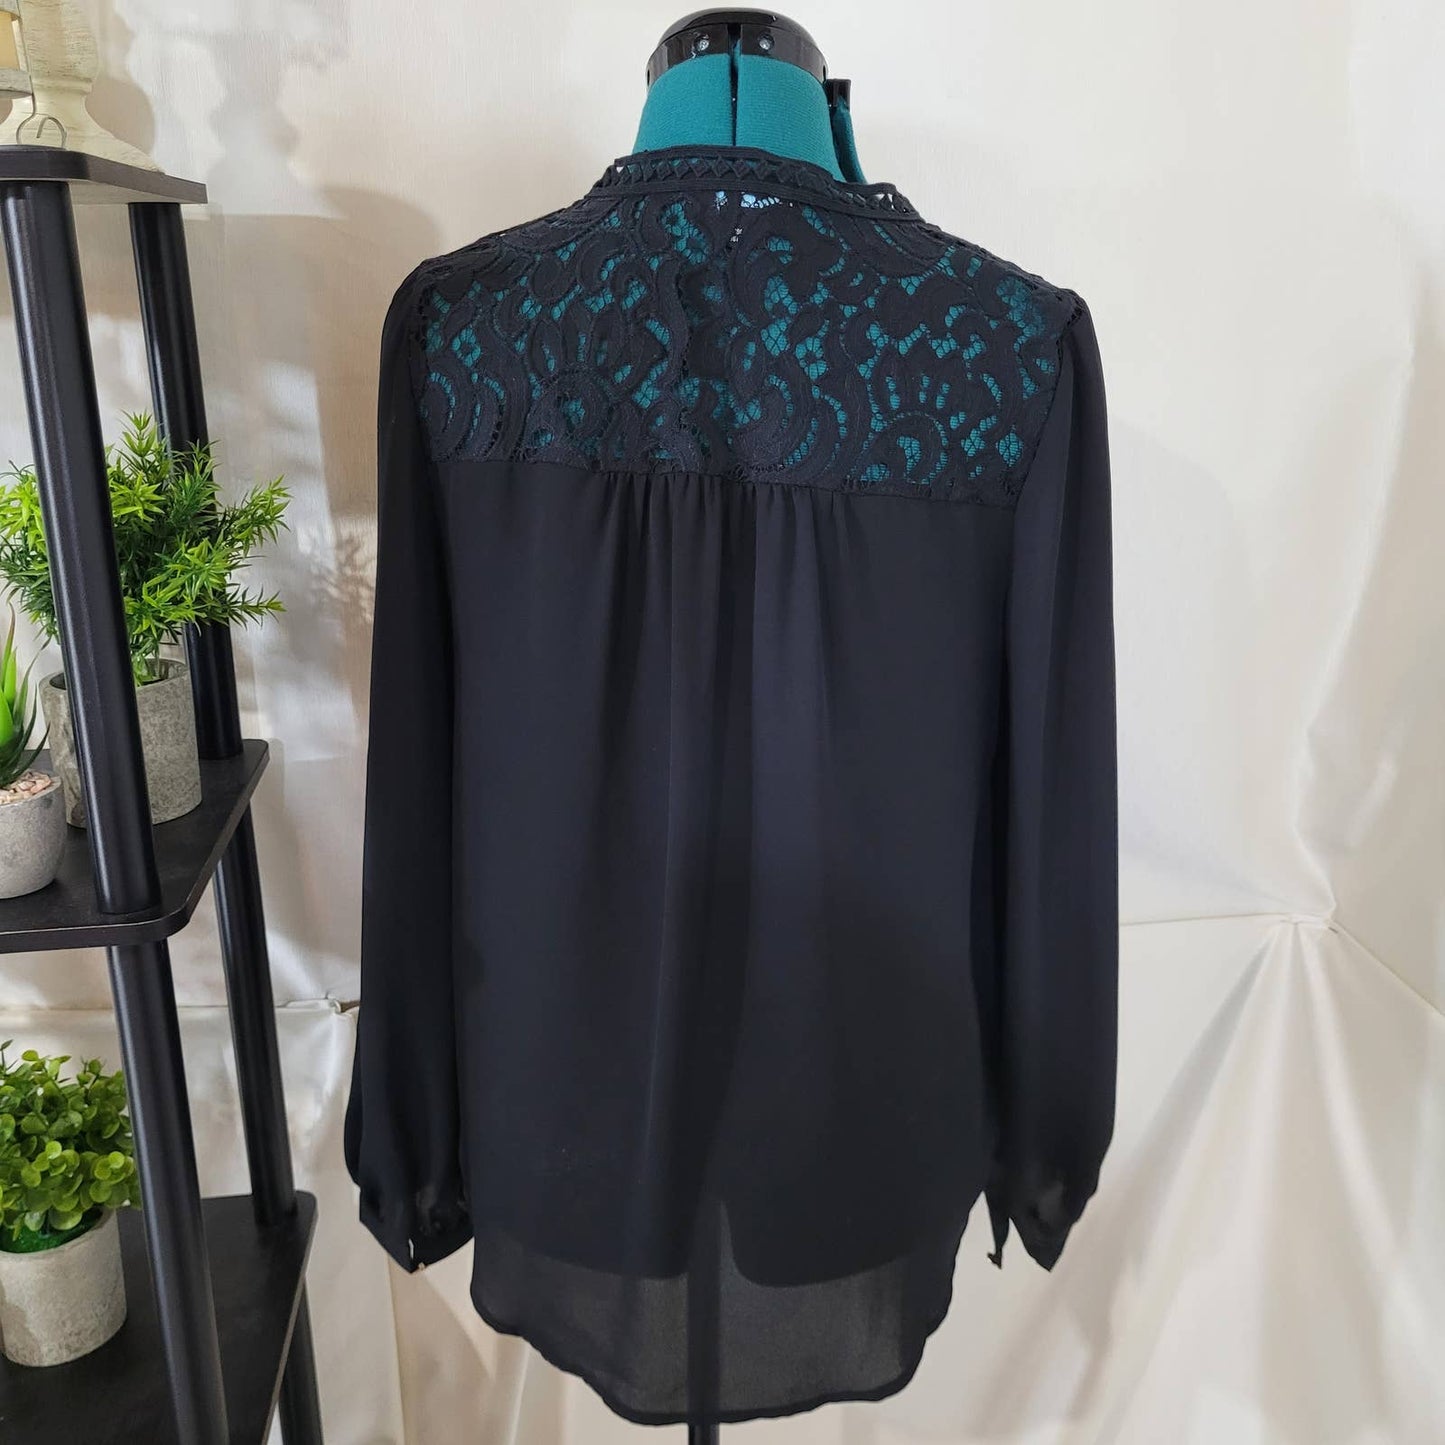 Marciano Black Chiffon Long Sleeve Blouse with Lace Accents - Size Small